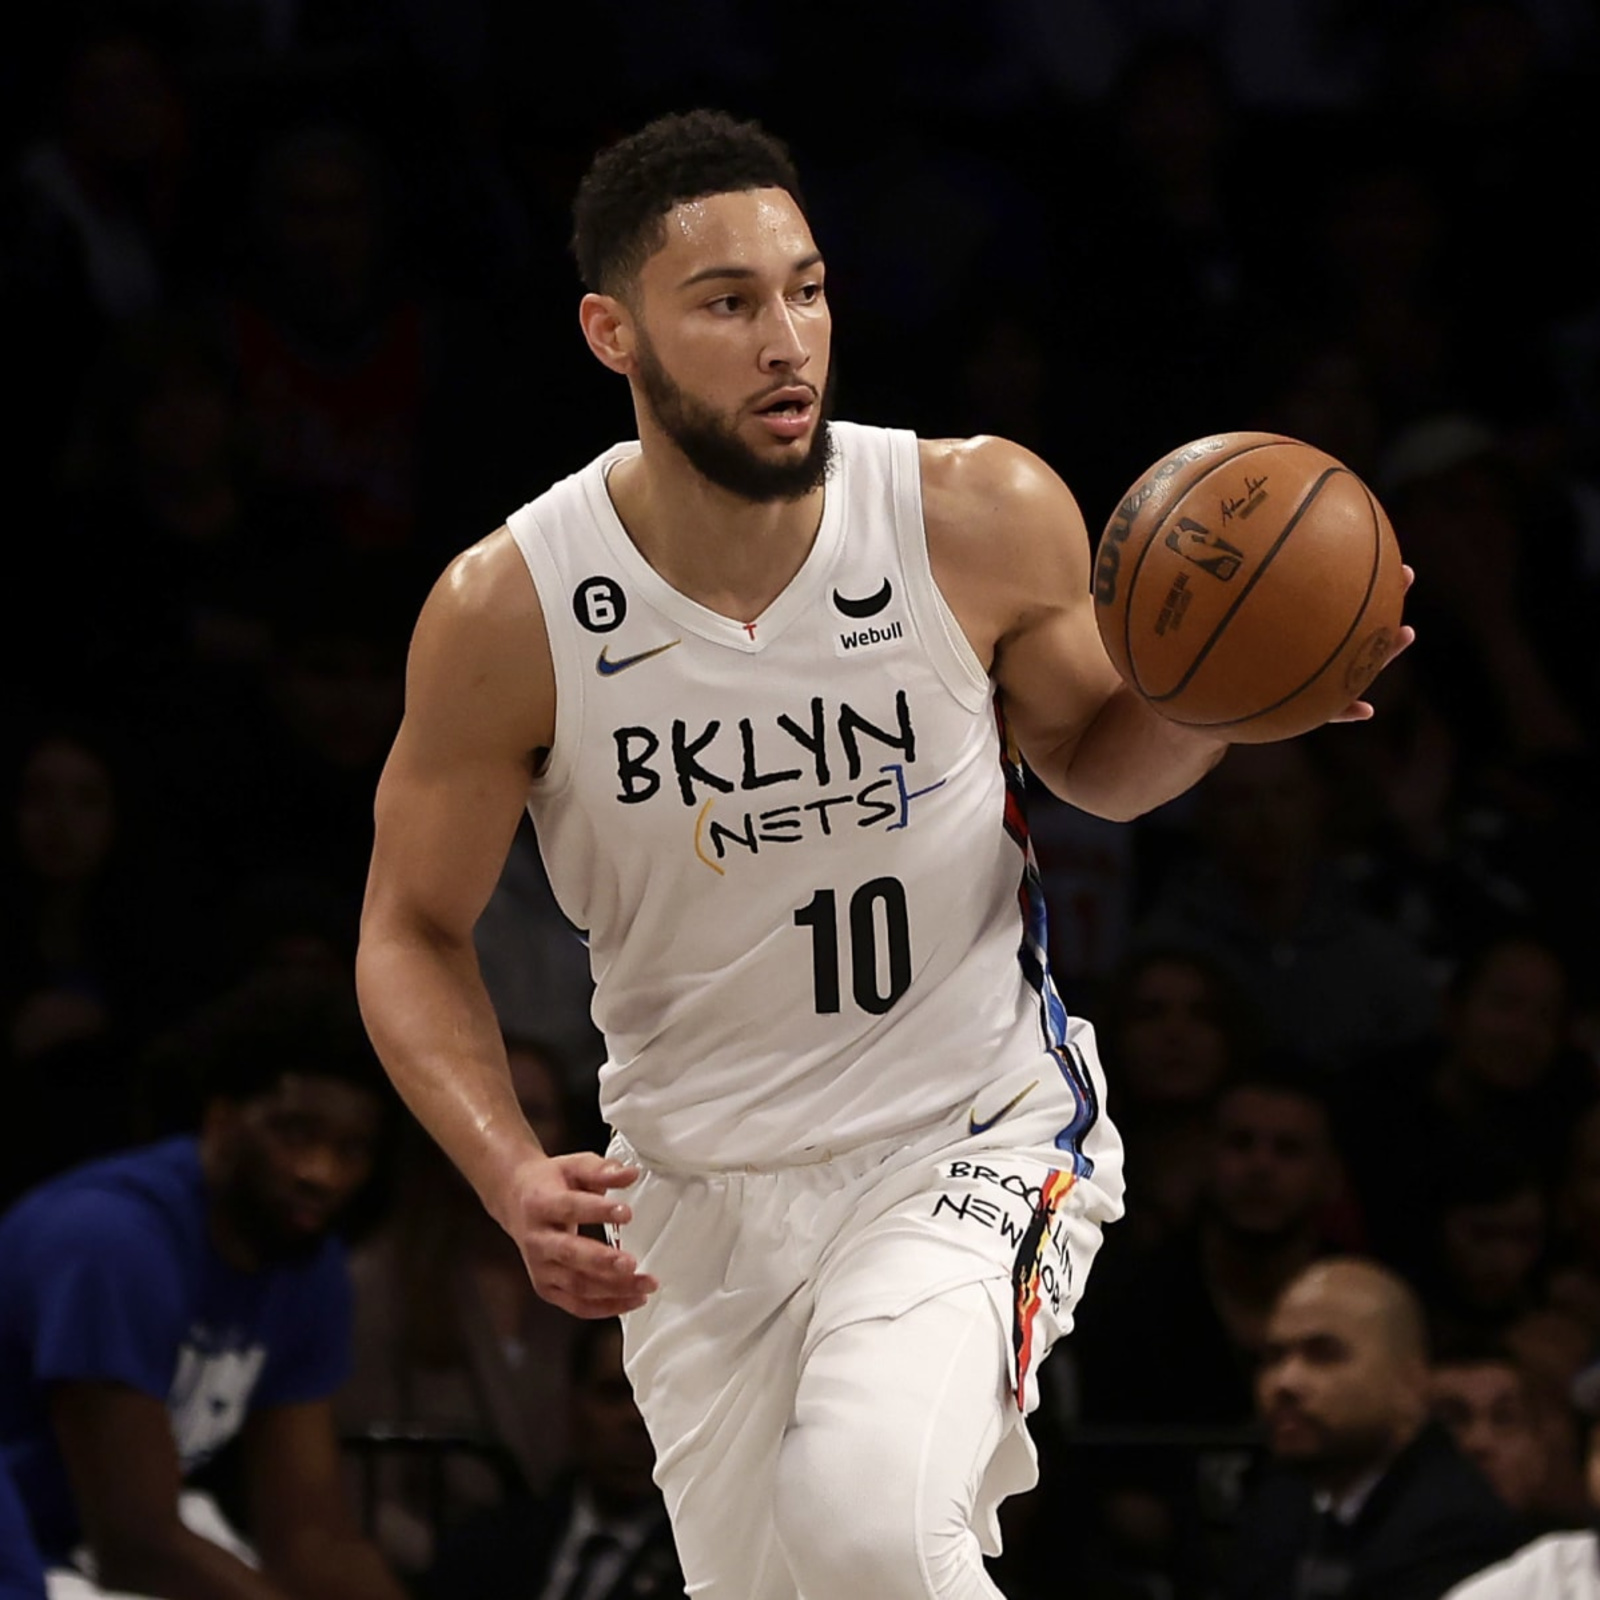 McCaffery: No surprise that Ben Simmons backed out of season early